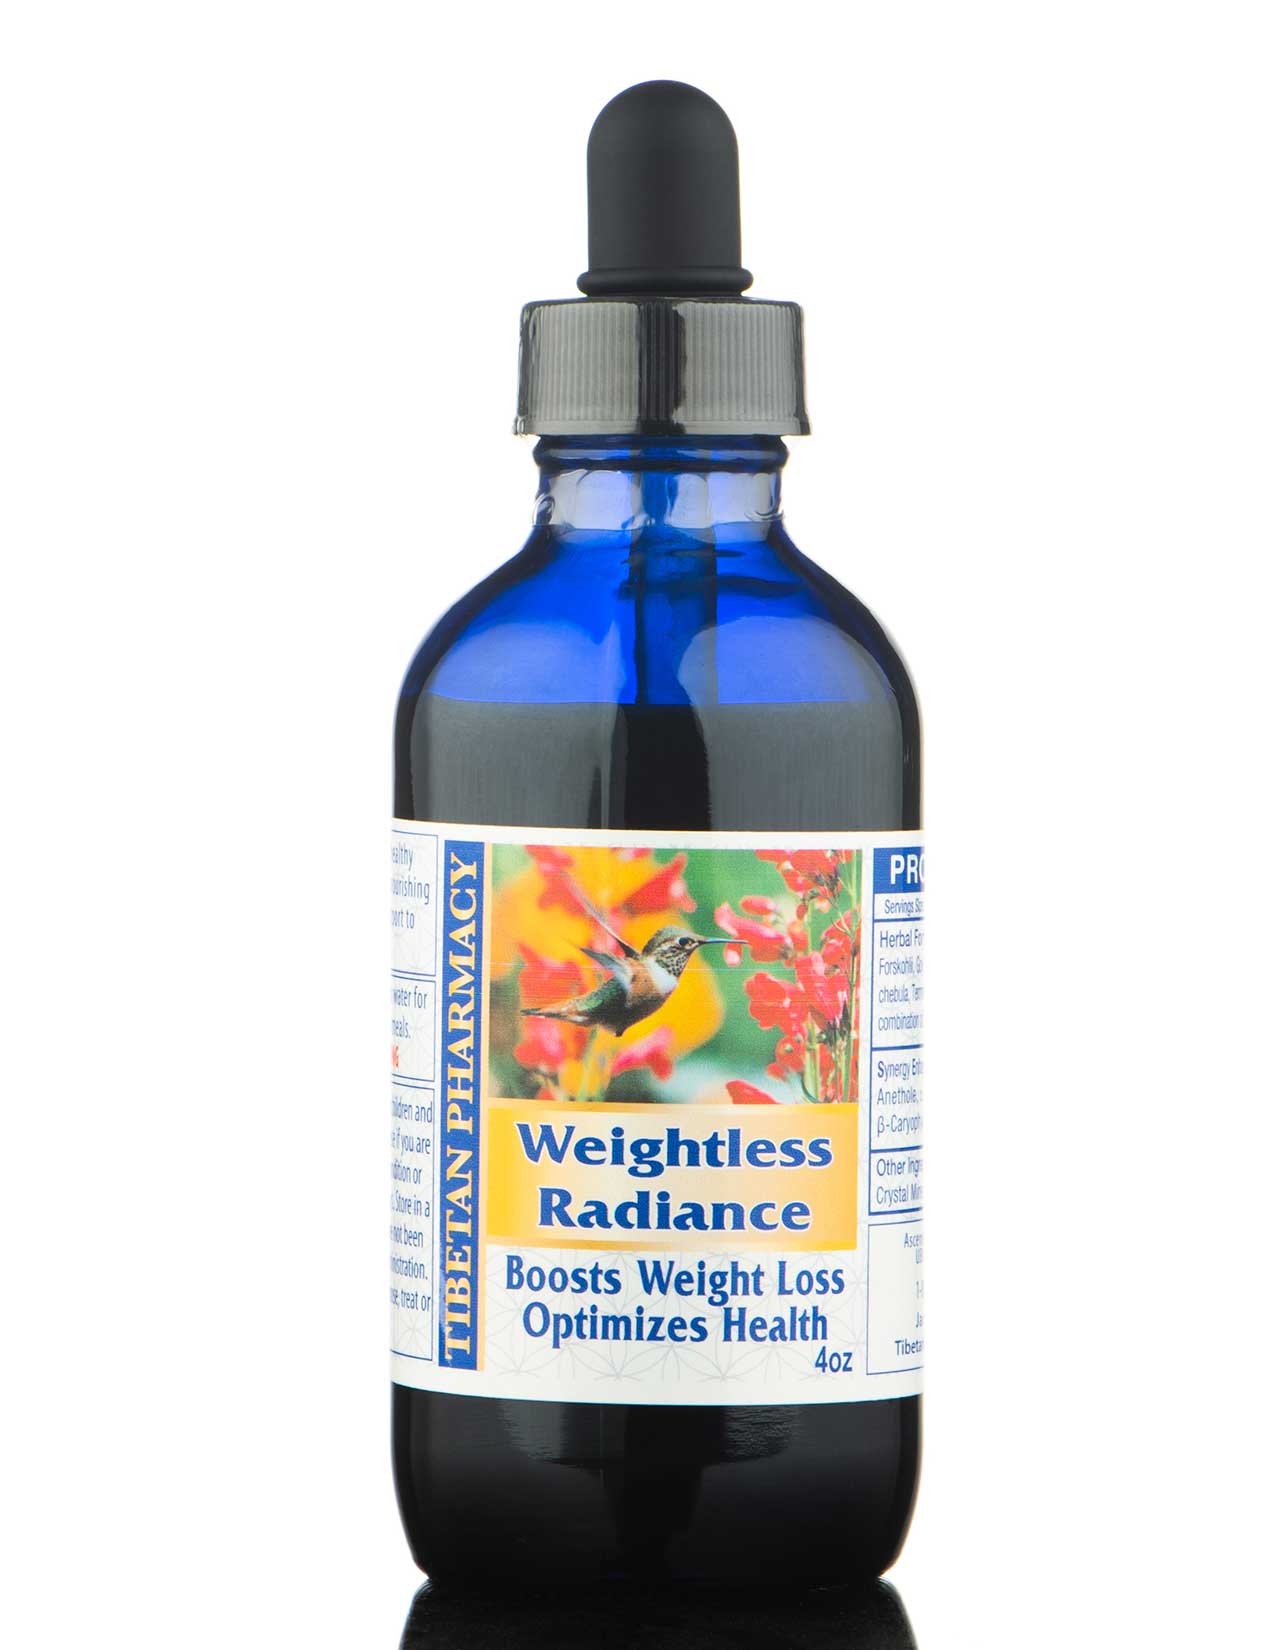 Weightless Radiance | Ignite Weight Loss and Enhance Well-Being